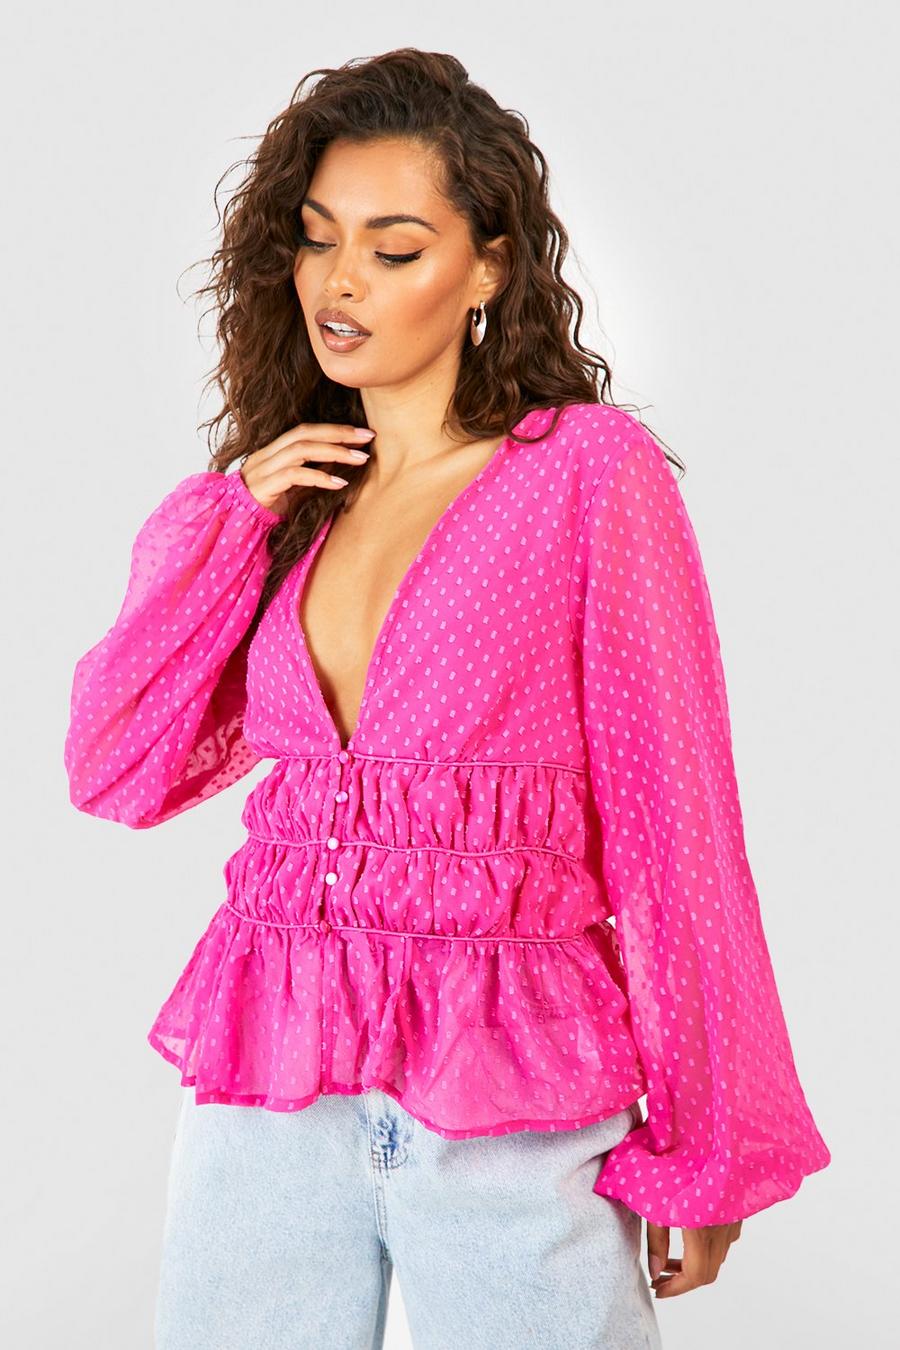 Blusa in rete plumetis con ruches, Hot pink image number 1